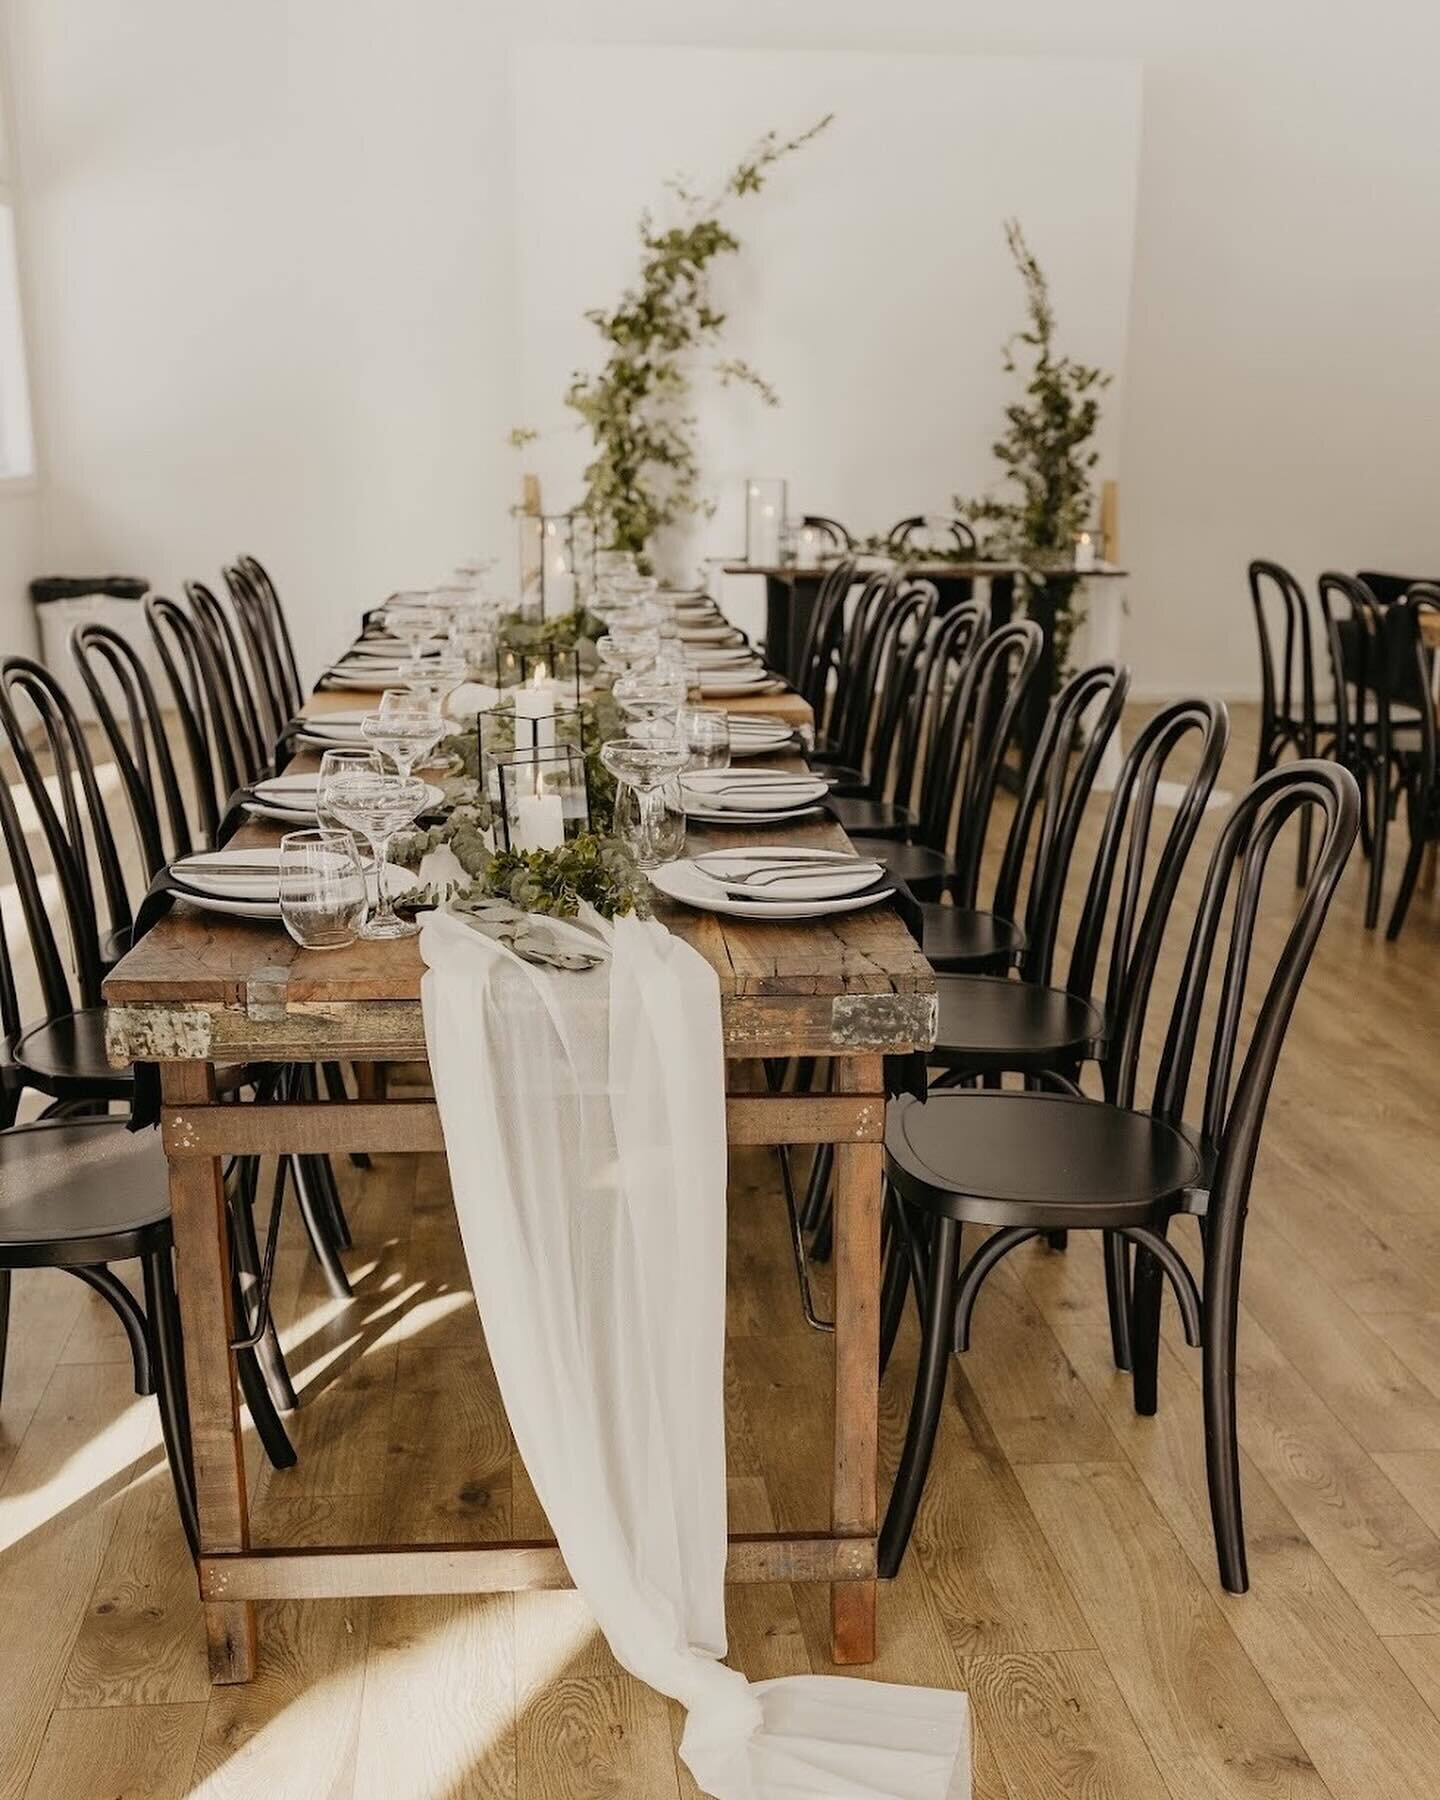 White Aspen Creative is one of our favorite venues here in Central Oregon! What&rsquo;s your favorite venue? 
⠀⠀⠀⠀⠀⠀⠀⠀⠀
📷 @juliadukephoto
@whiteaspencreative
@gwynrider
@posie_shoppe
@aandbe_seattle
@crumb_cakery
@rev.chrislewis